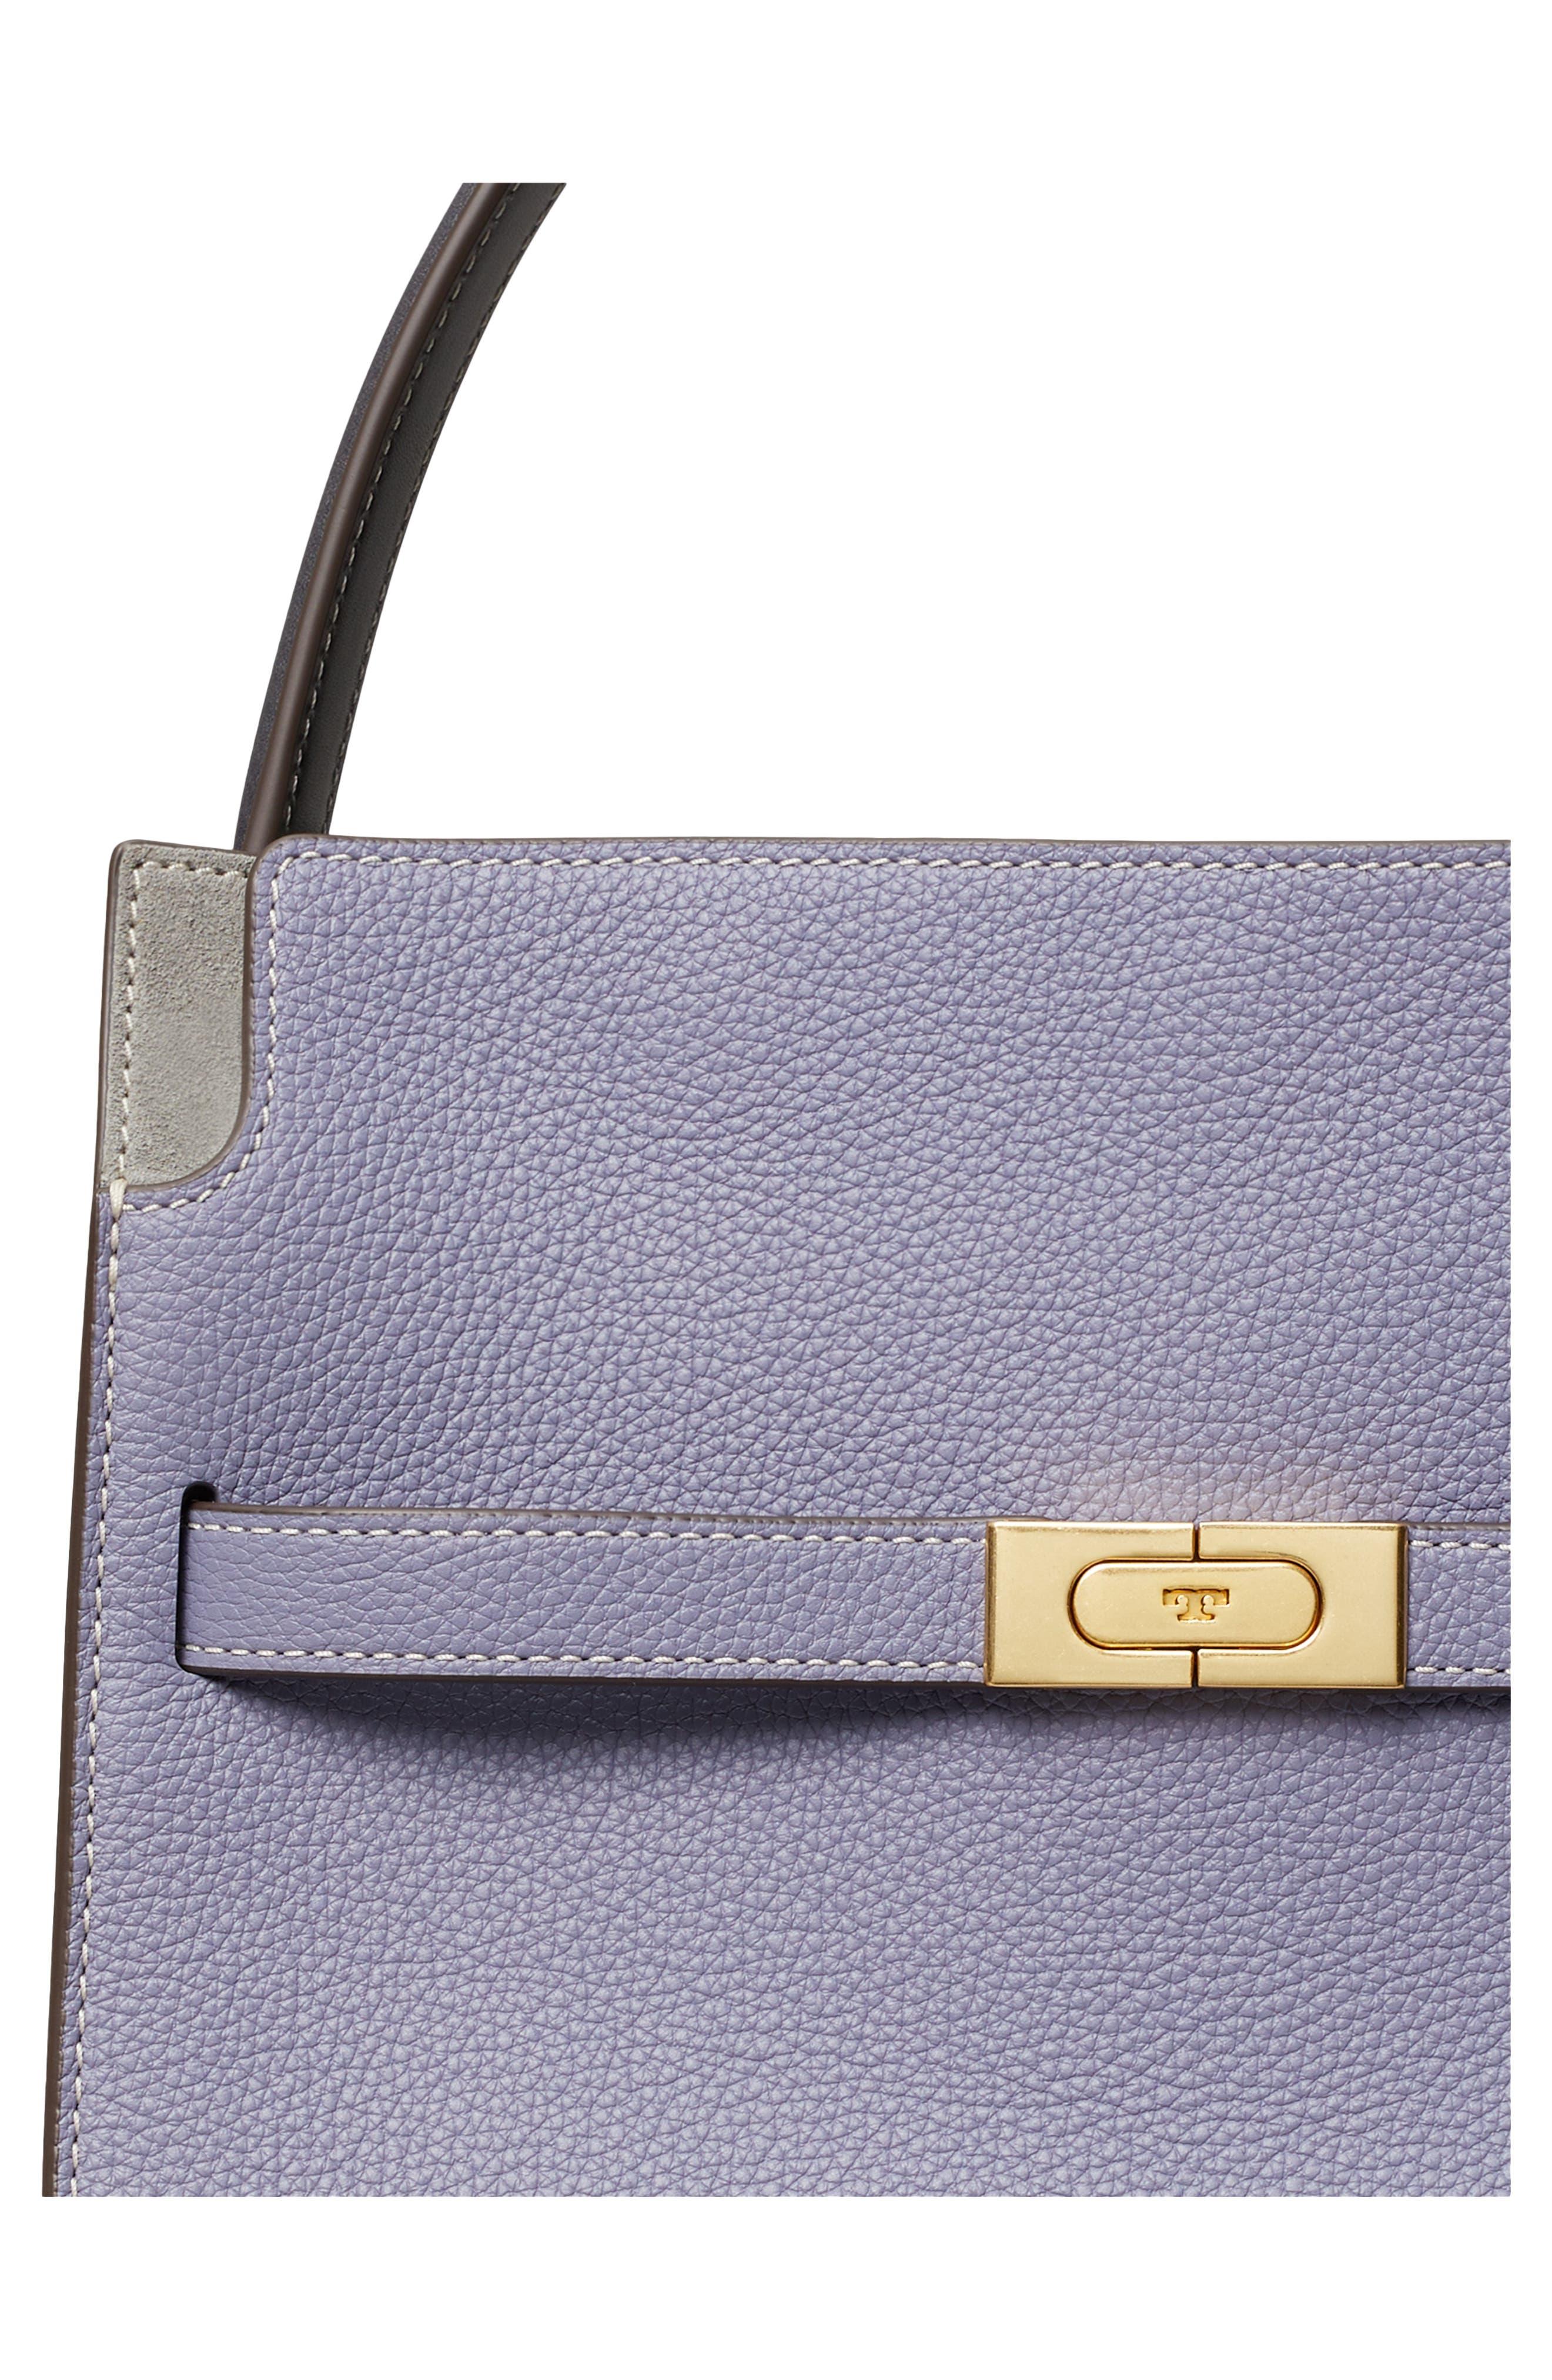 Tory Burch Lee Radziwill Double Bag in Blue